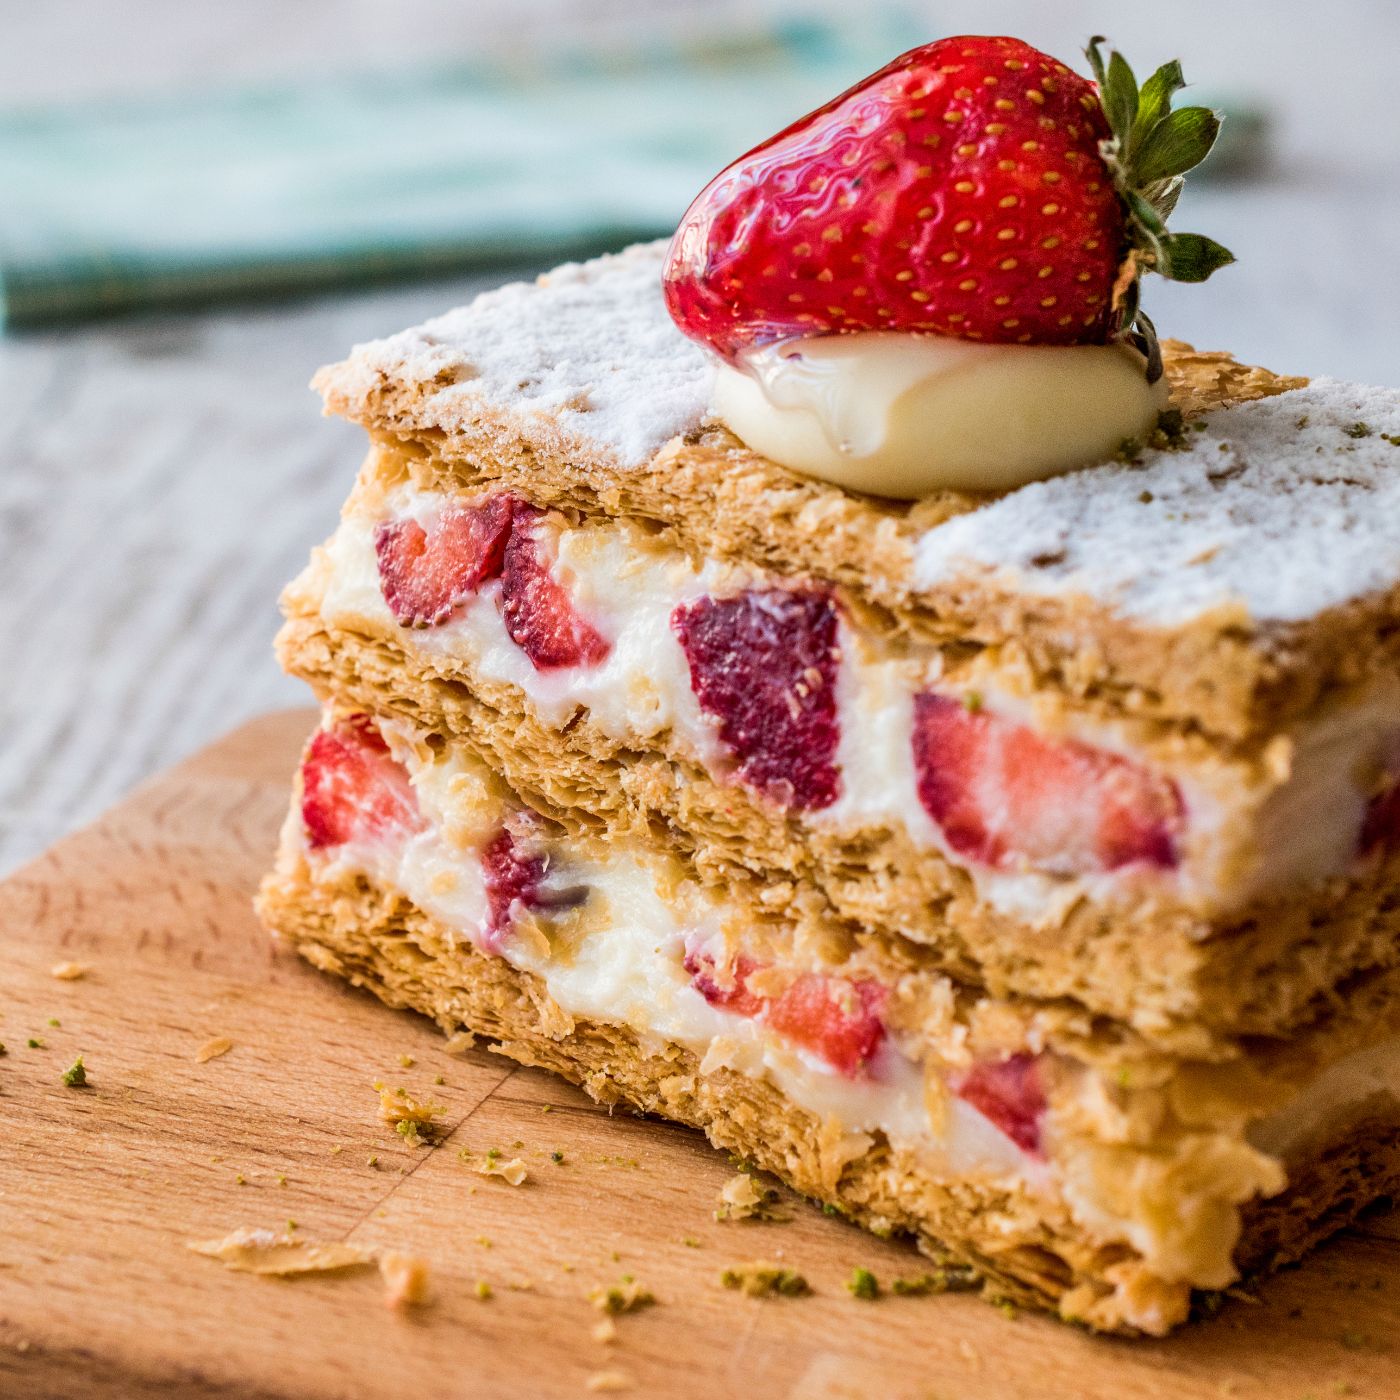 Strawberry-puff-mille-feuille-with-strawberry.-821353264_3869x2579 square.jpeg